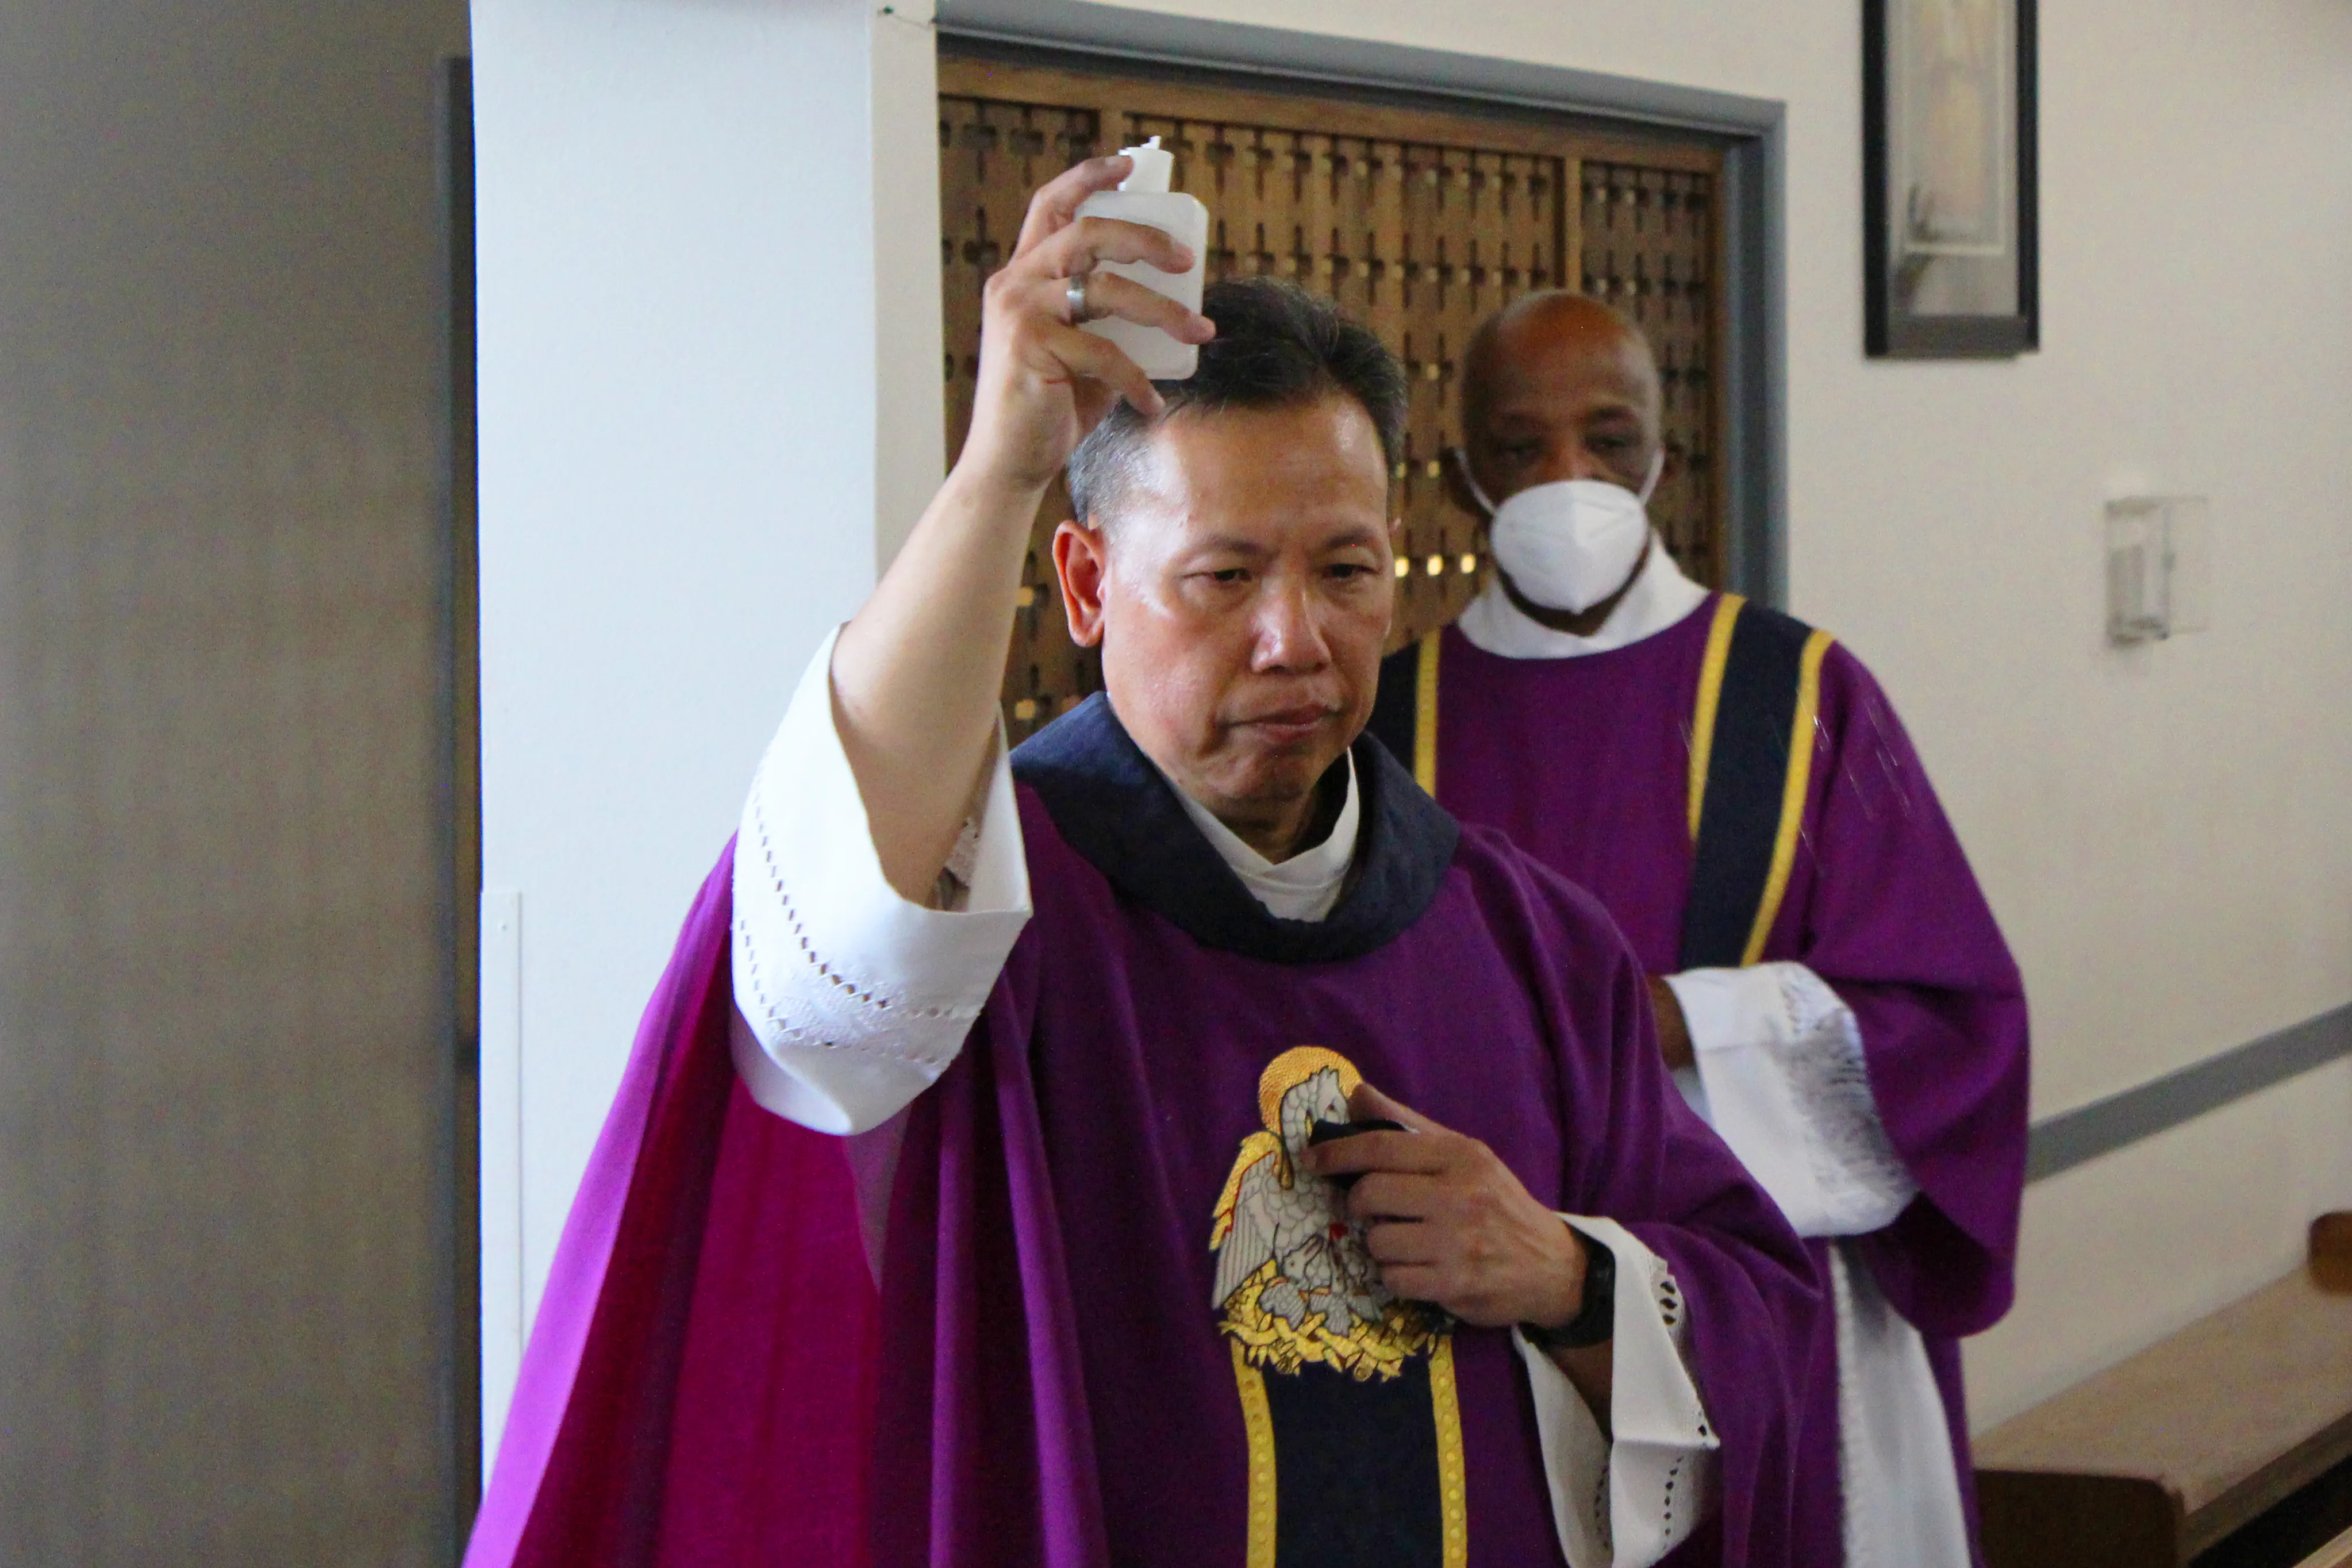 Father Joseph Cao, assisted by Deacon Clarence McDavid, blesses the parts of the church affected by an Aug. 30 break-in, during a Mass of reparation at Curé d'Ars Catholic Church in Denver, Colo., Sept. 1, 2021.?w=200&h=150